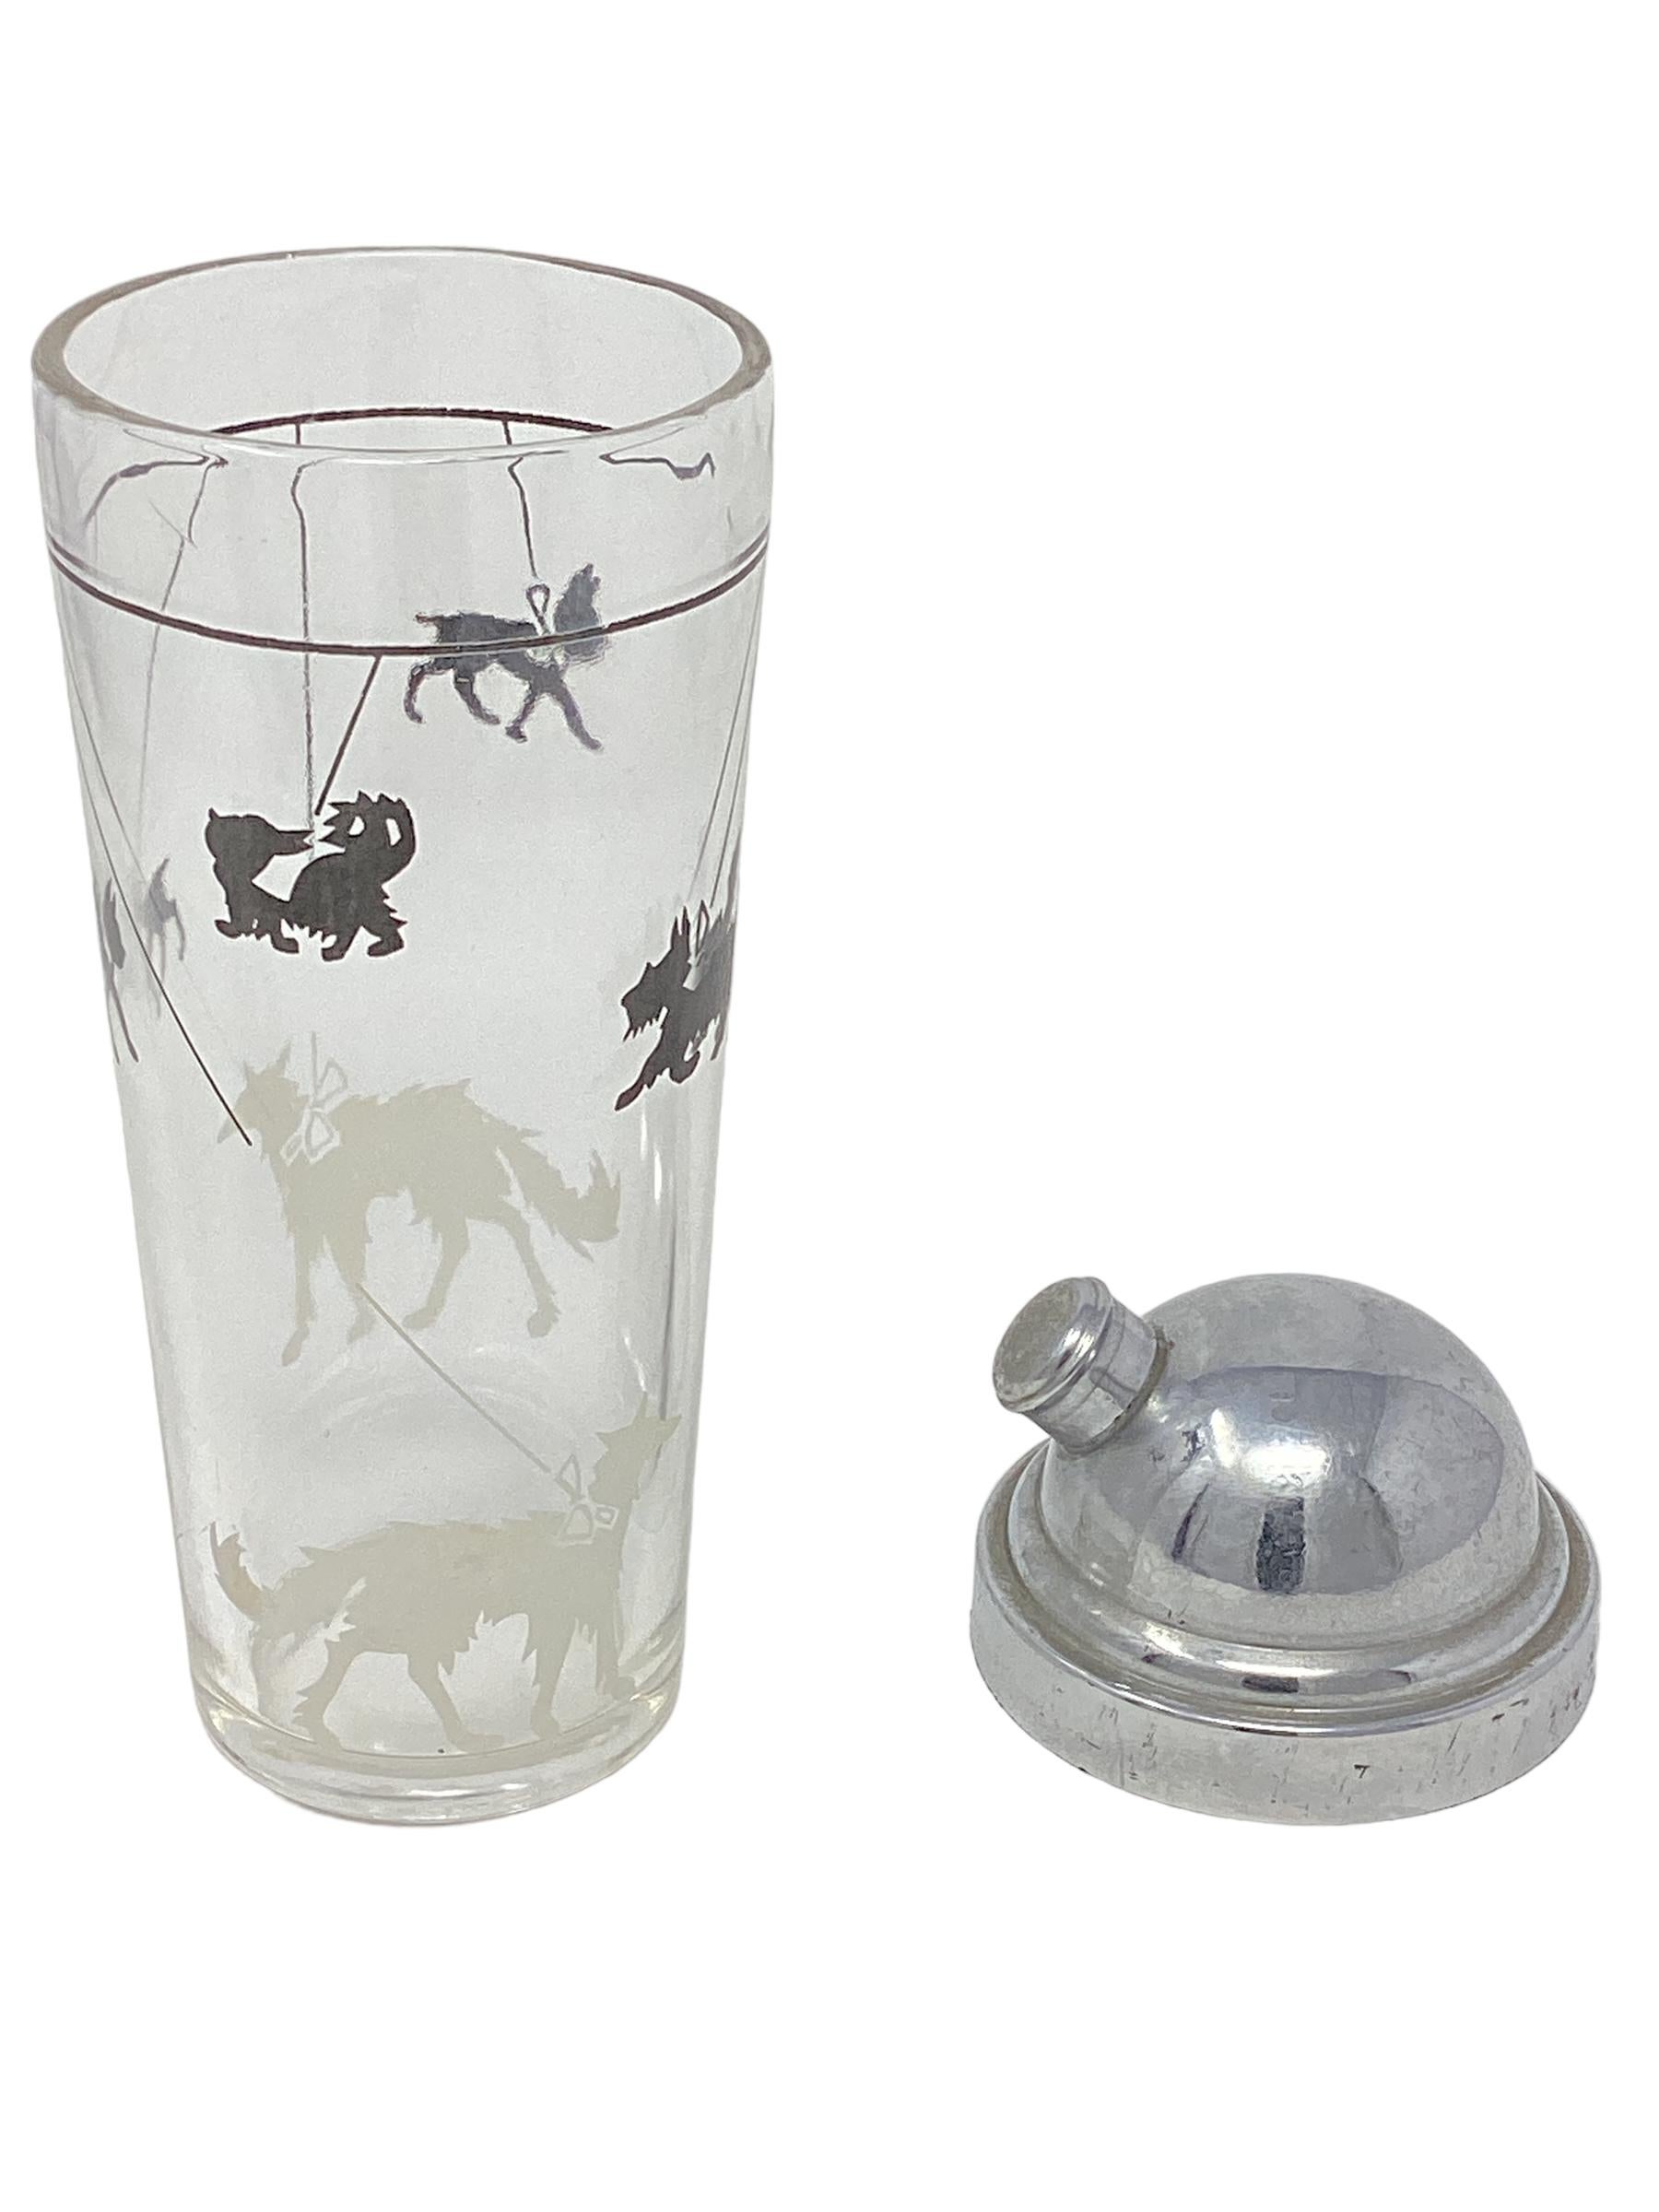 Art Deco Hazel-Atlas Cocktail Shaker with Leashed Dogs For Sale 2